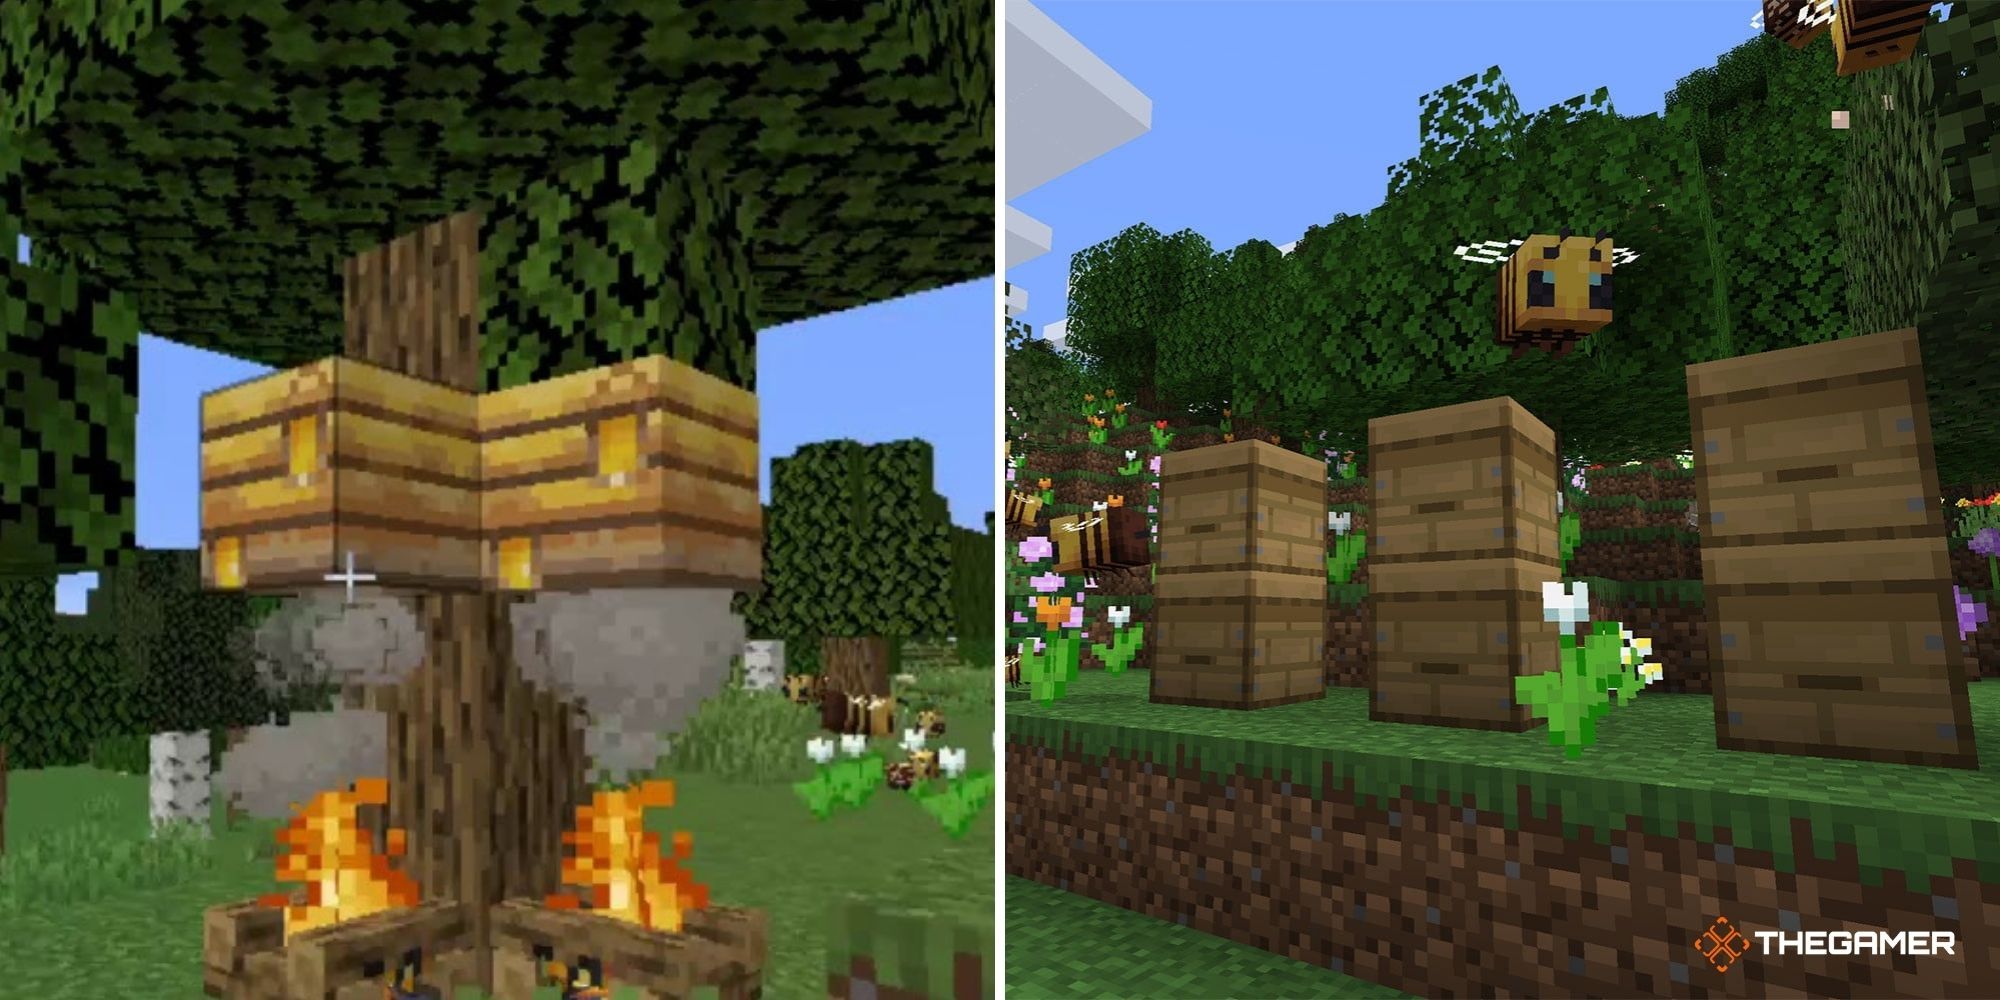 Minecraft Bees split image - bee nests on a tree (left), bees flying around beehives (right)